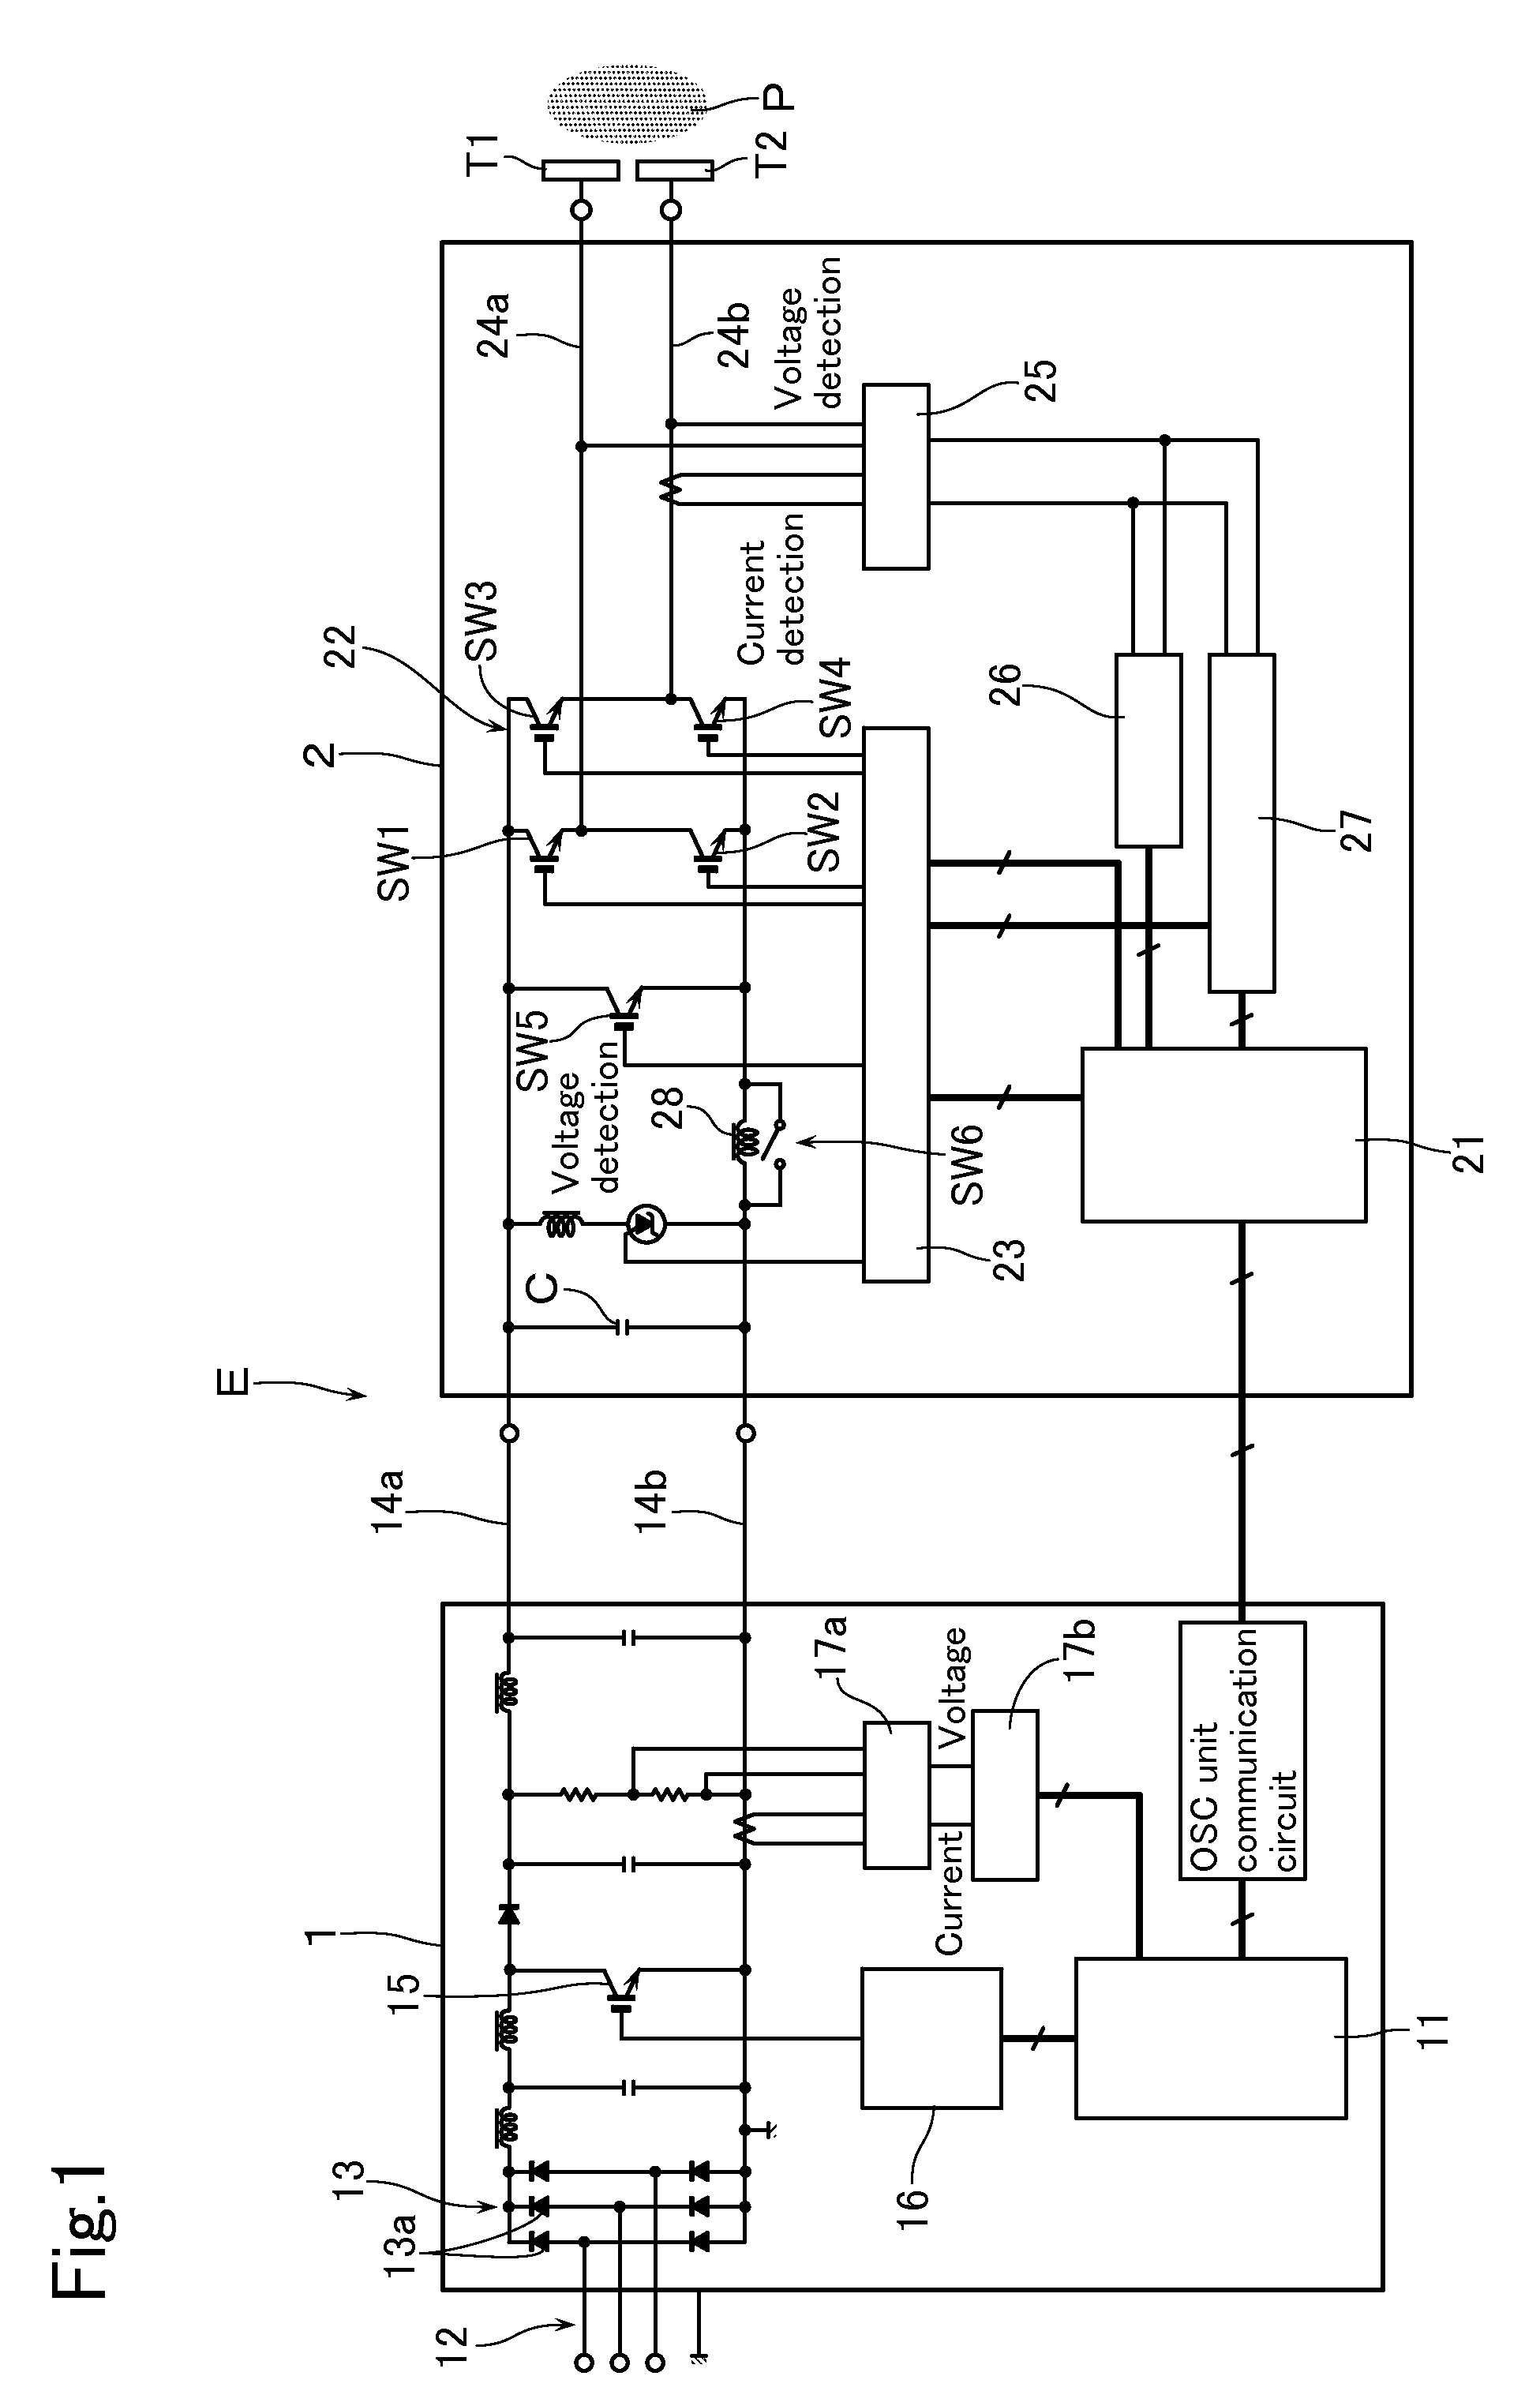 Bipolar pulsed power supply and power supply apparatus having plurality of bipolar pulsed power supplies